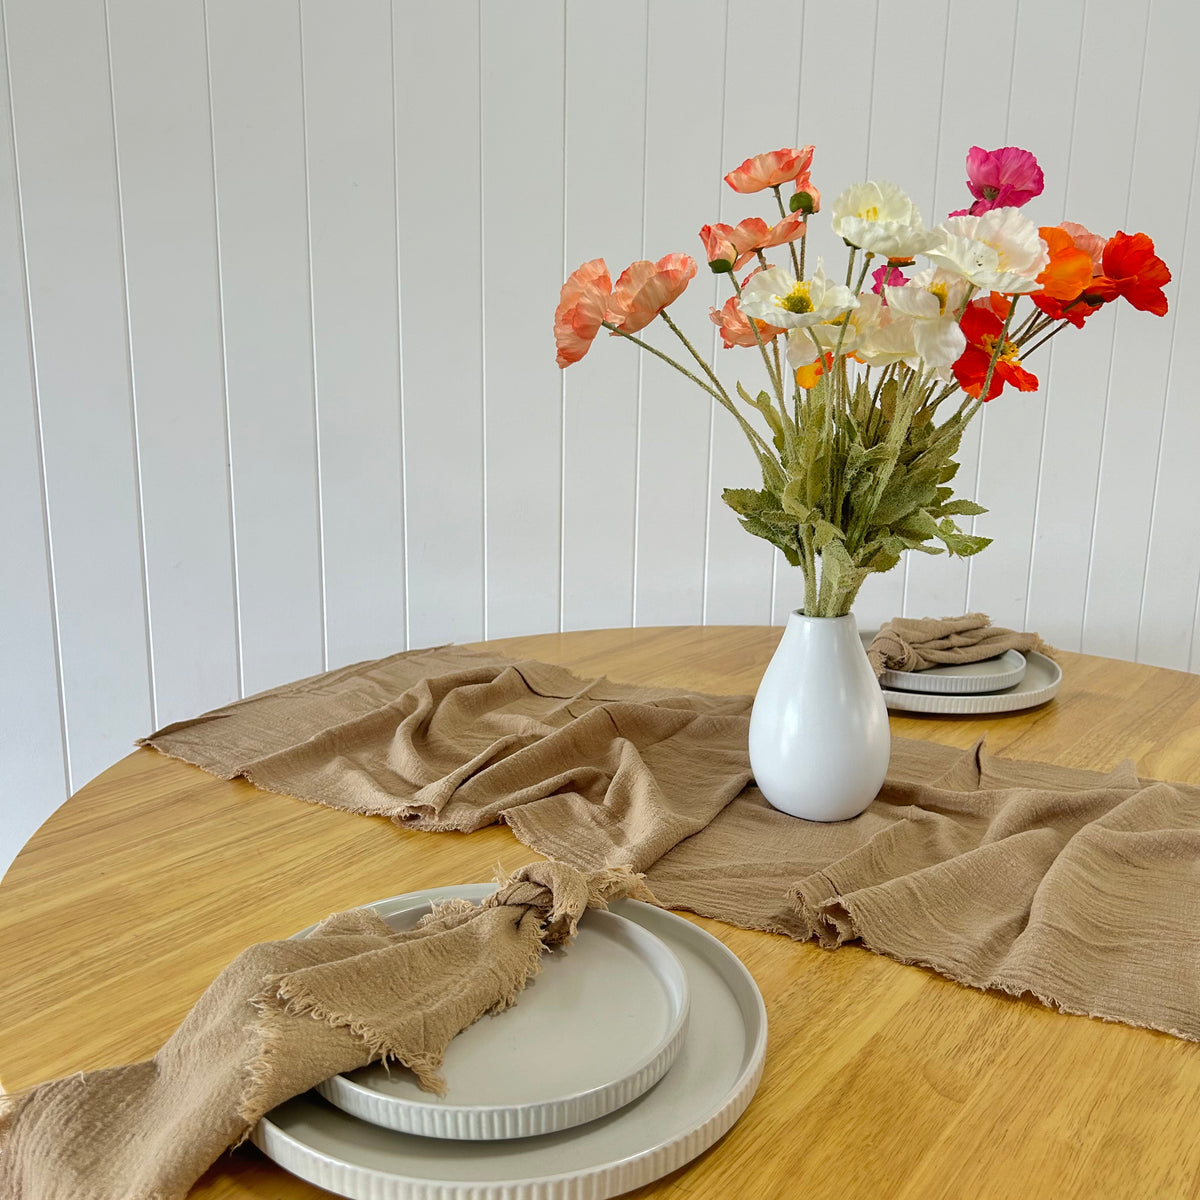 Latte Rustic Cotton Table Runners - 3m